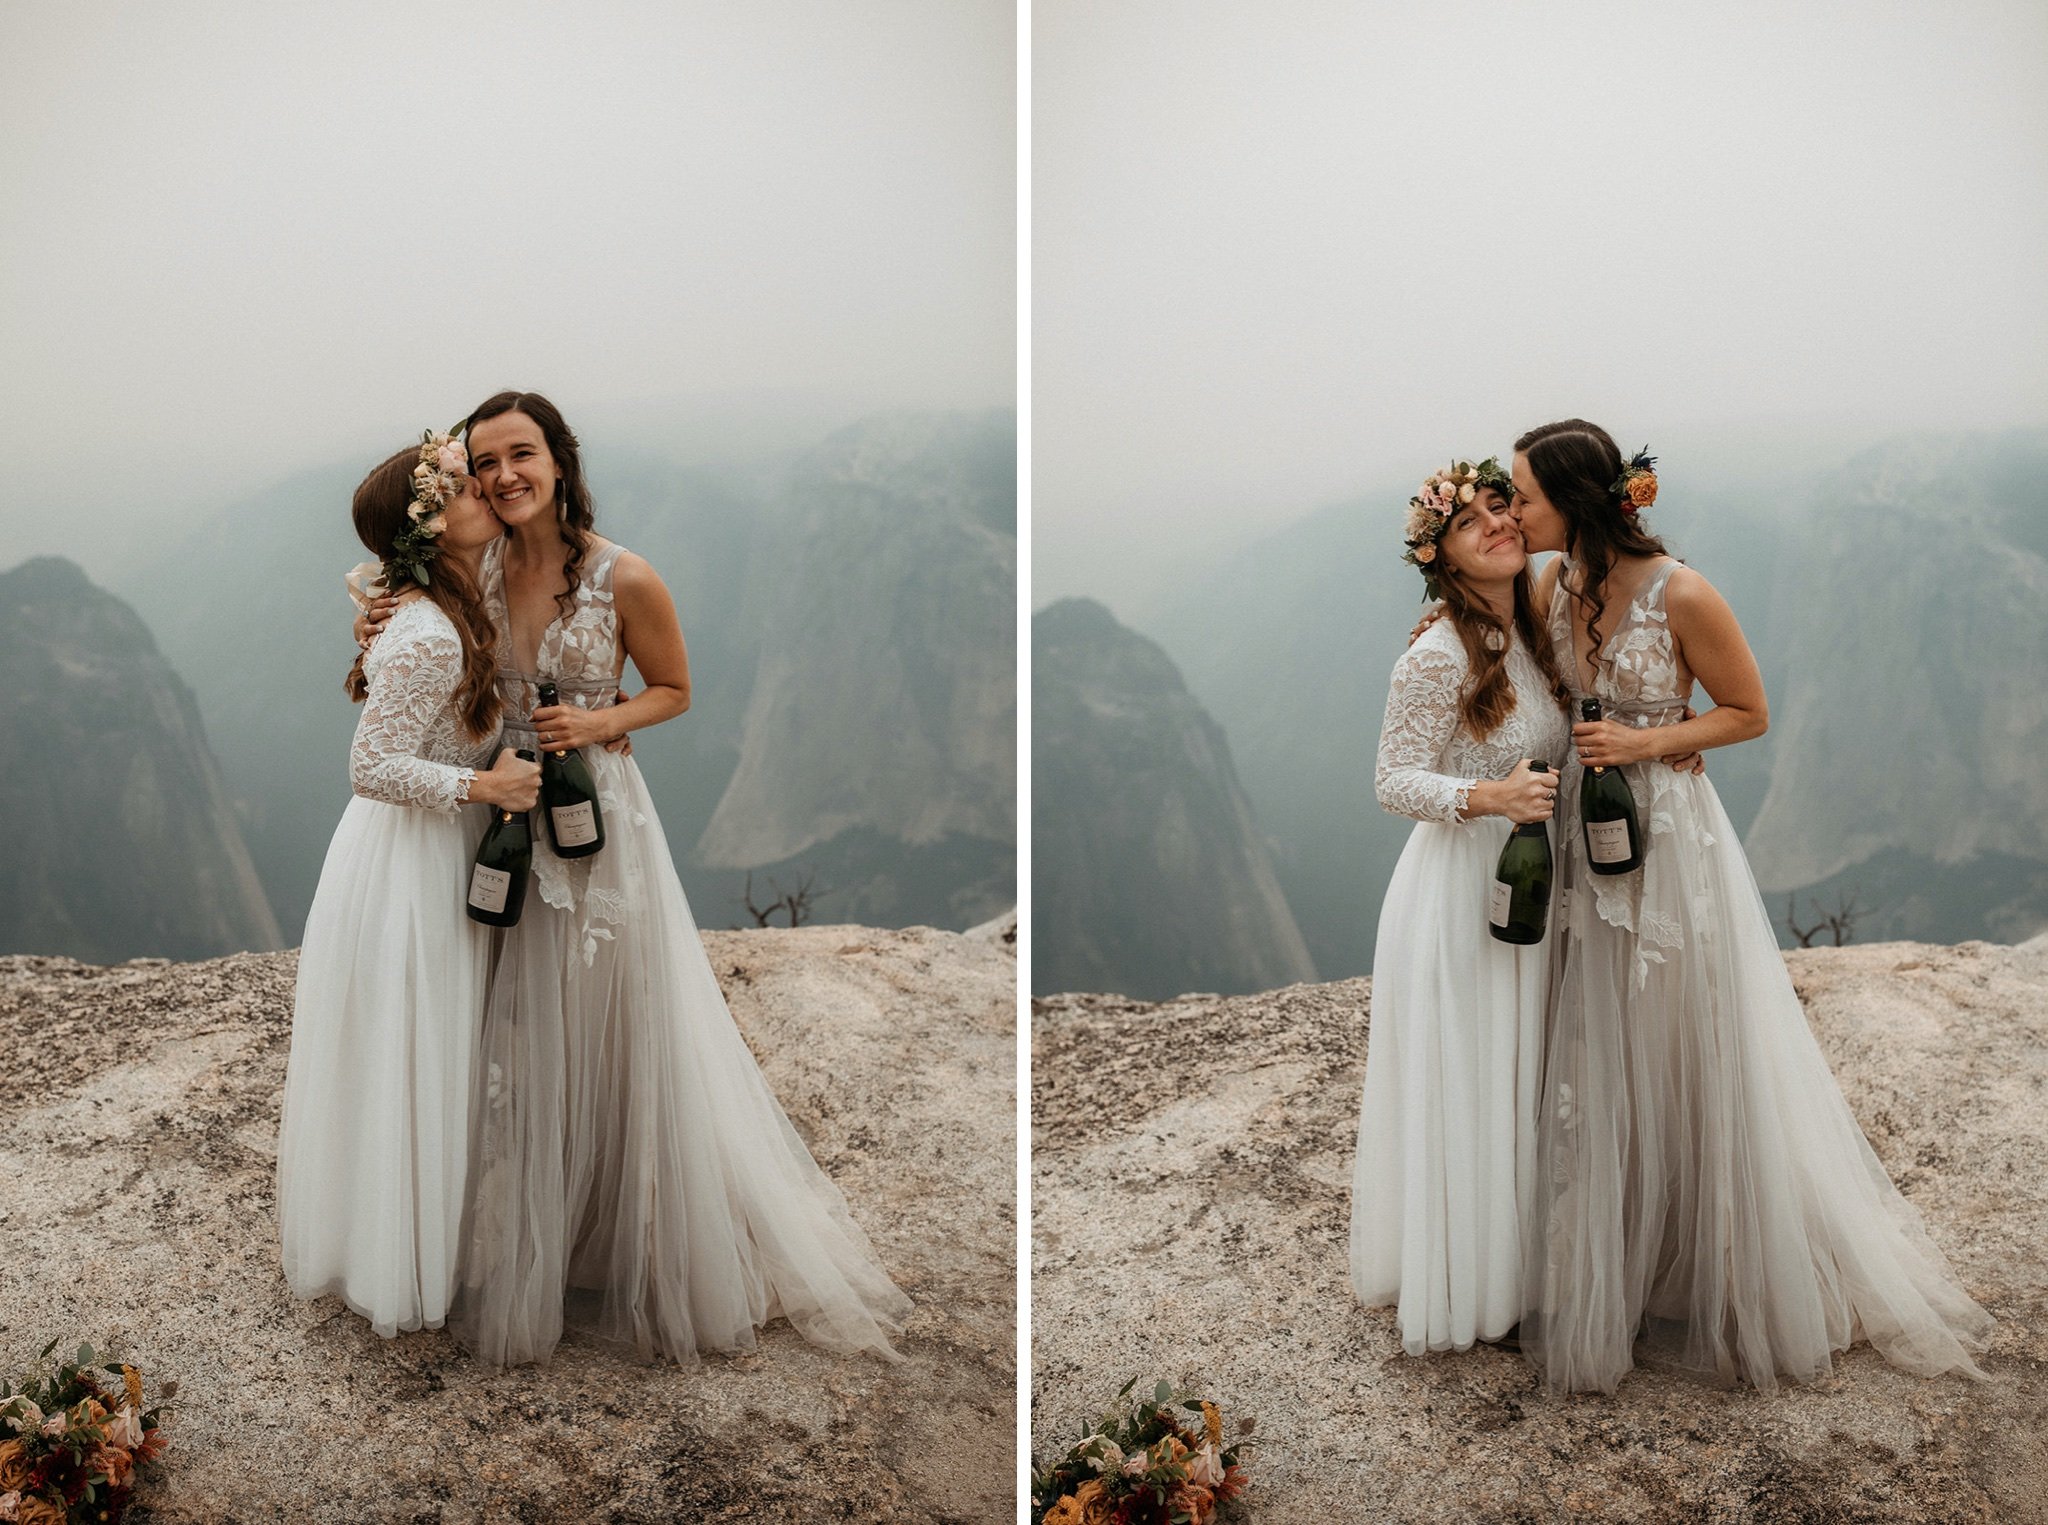 Yosemite National Park Elopement with Two Brides-Will Khoury48.jpg